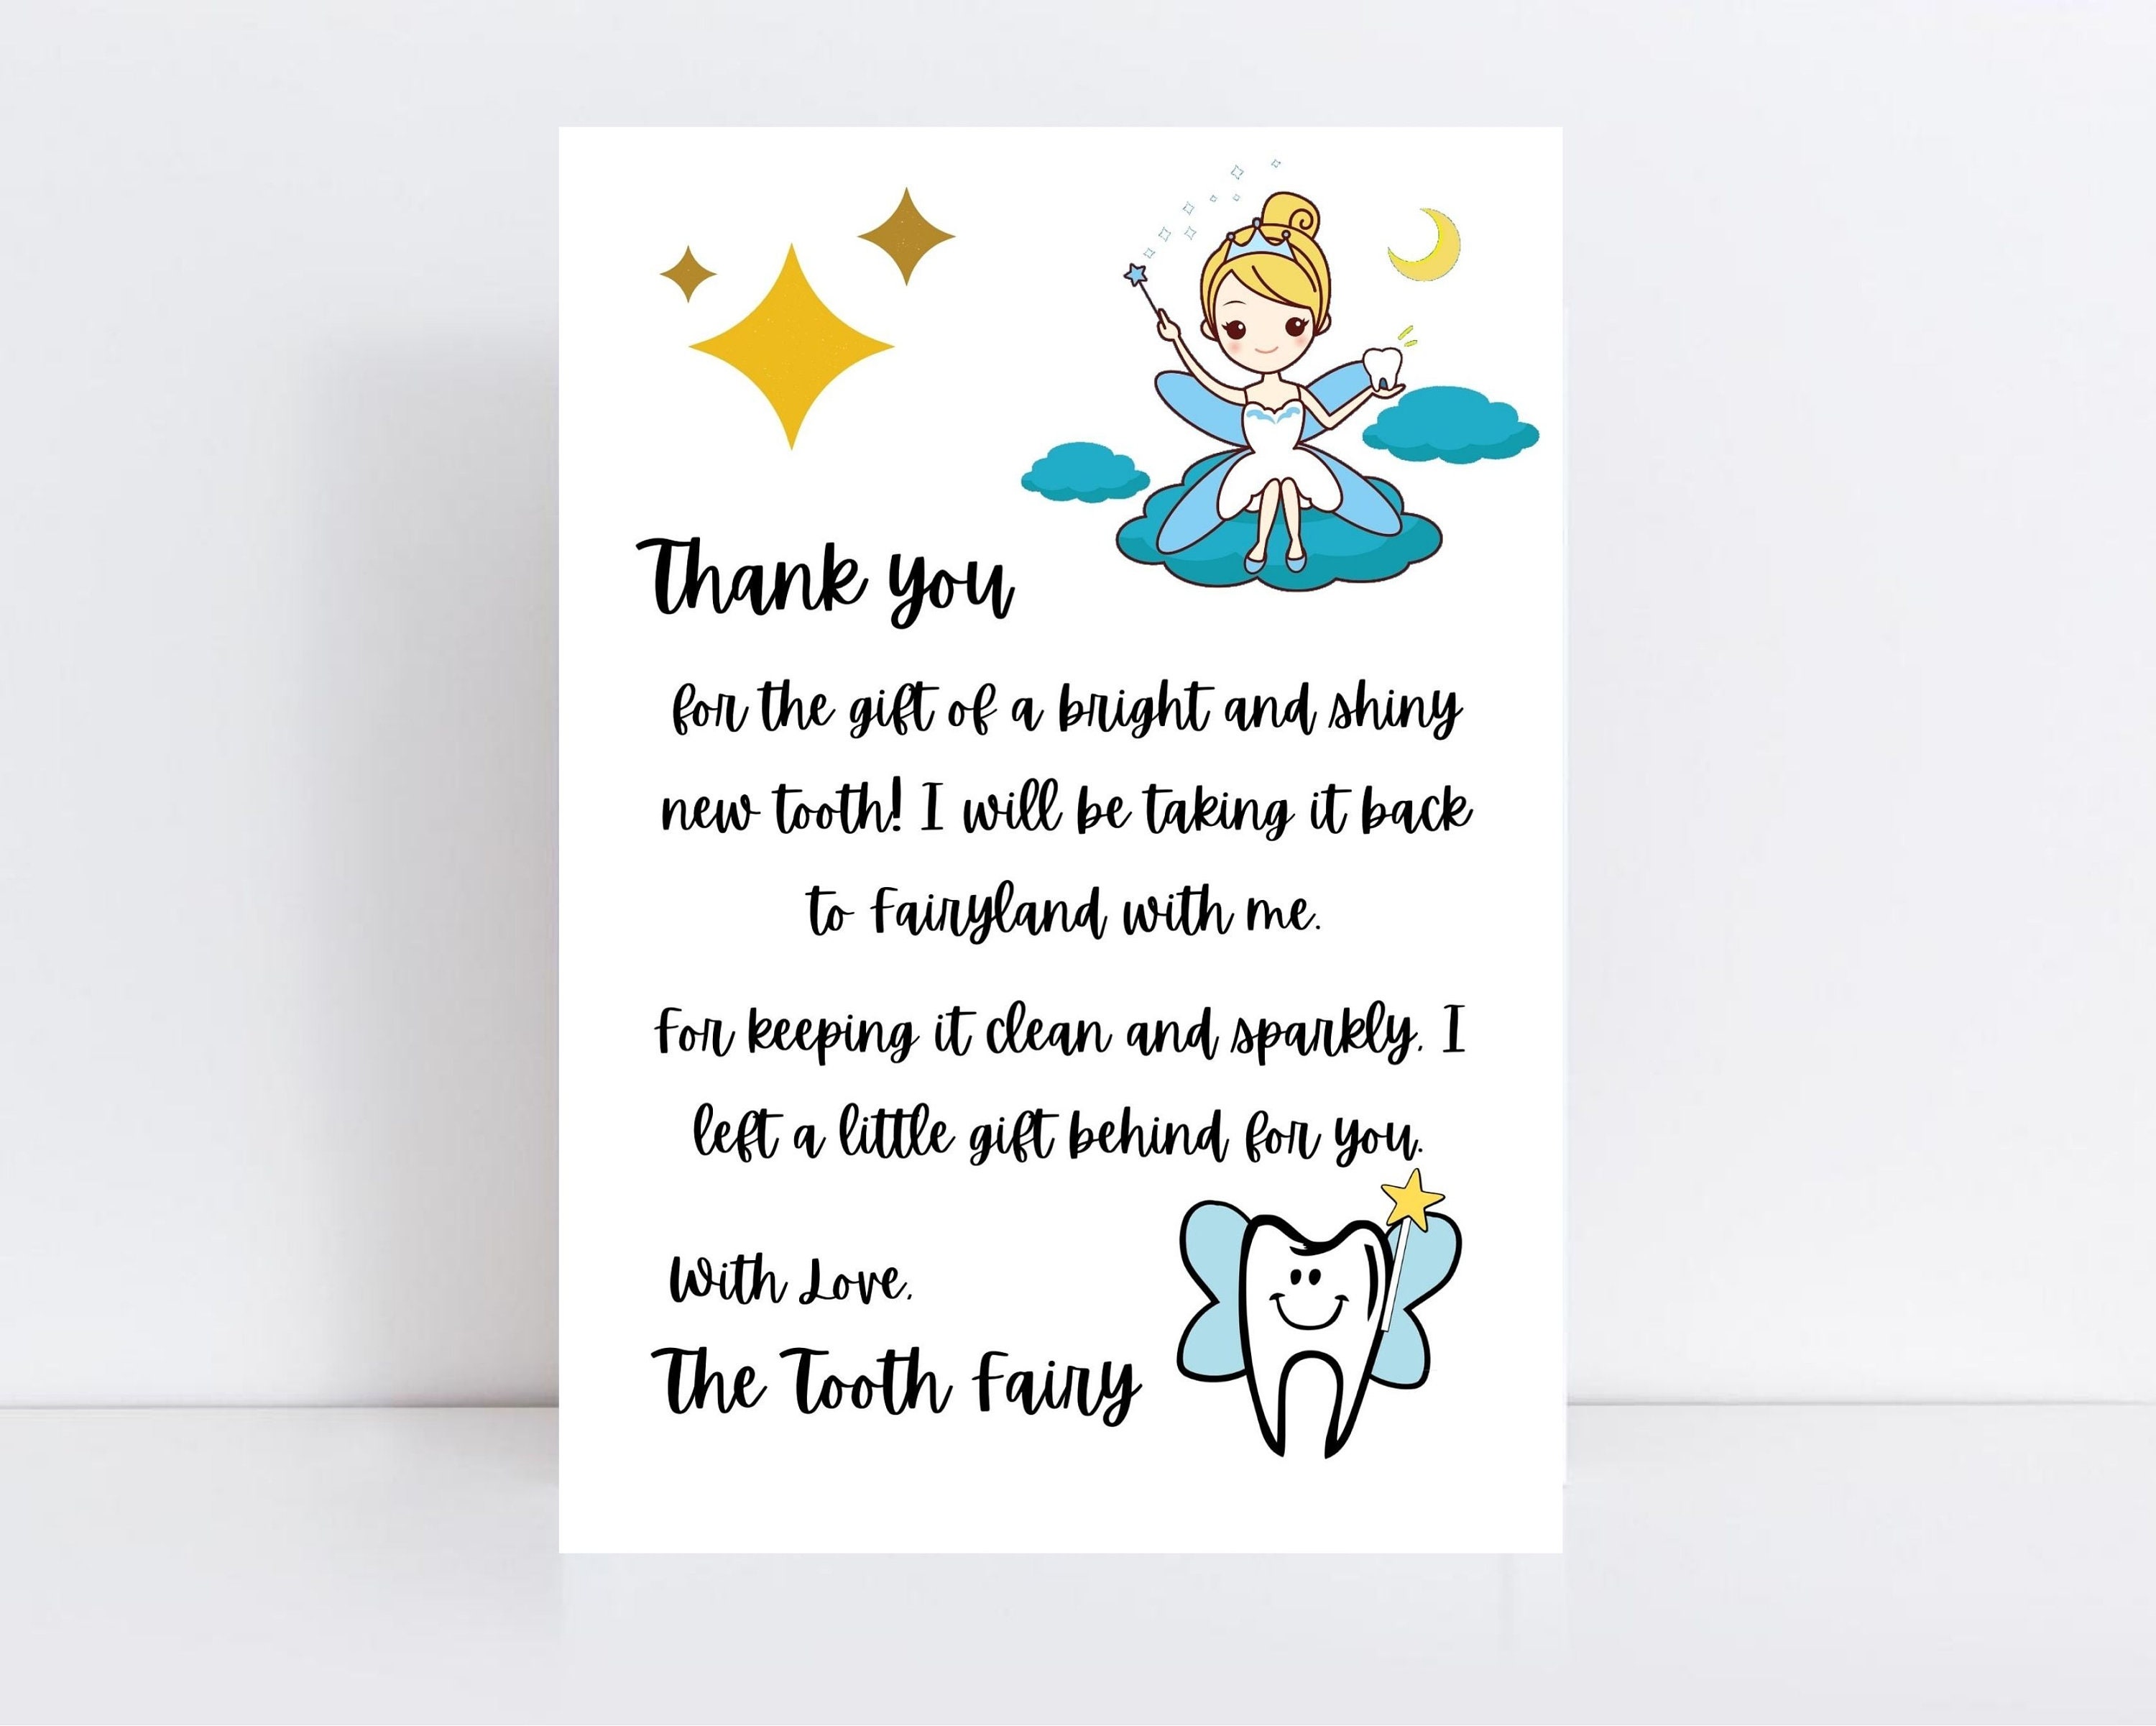 Tooth Fairy Letter Free Printable Lacienciadelcafe ar